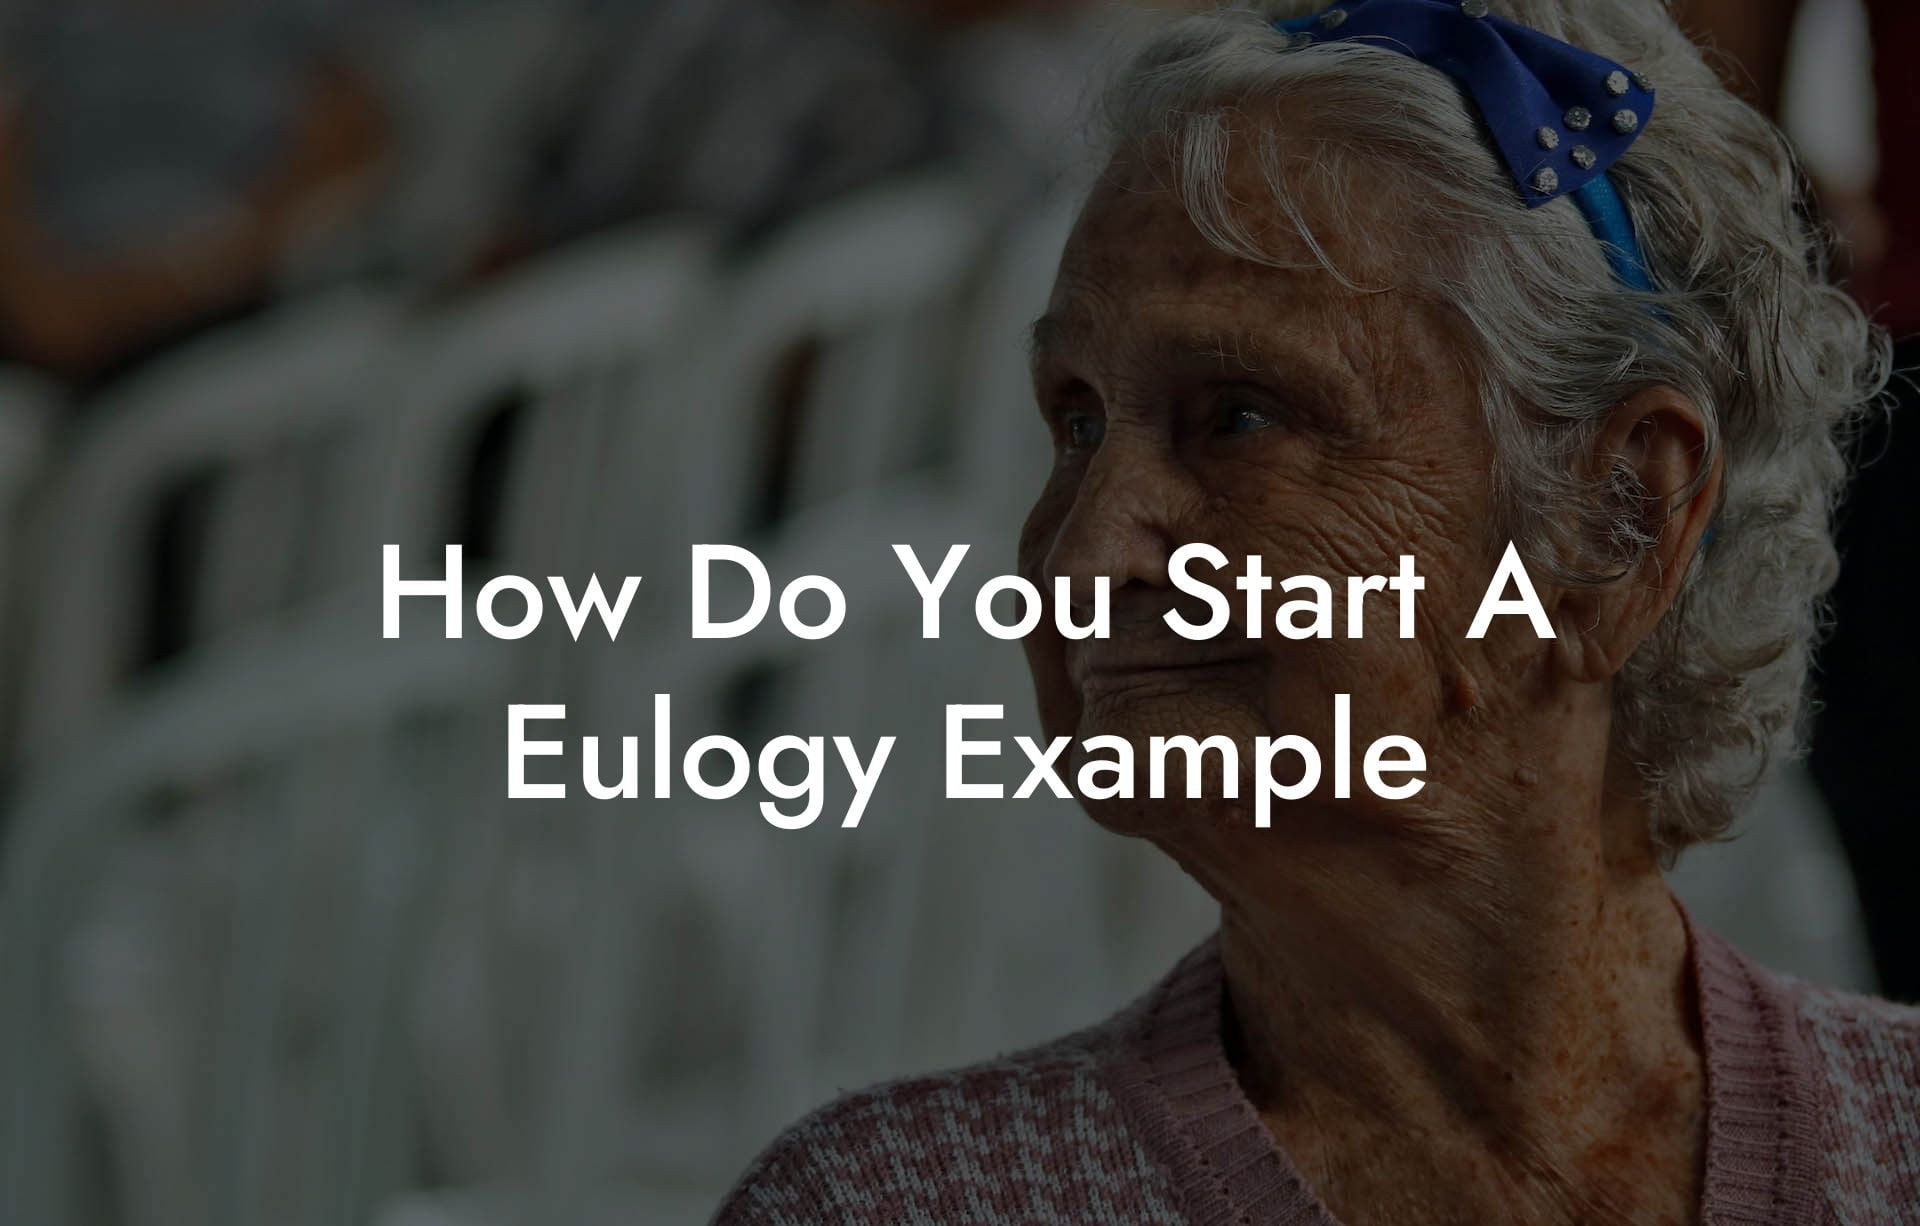 How Do You Start A Eulogy Example?